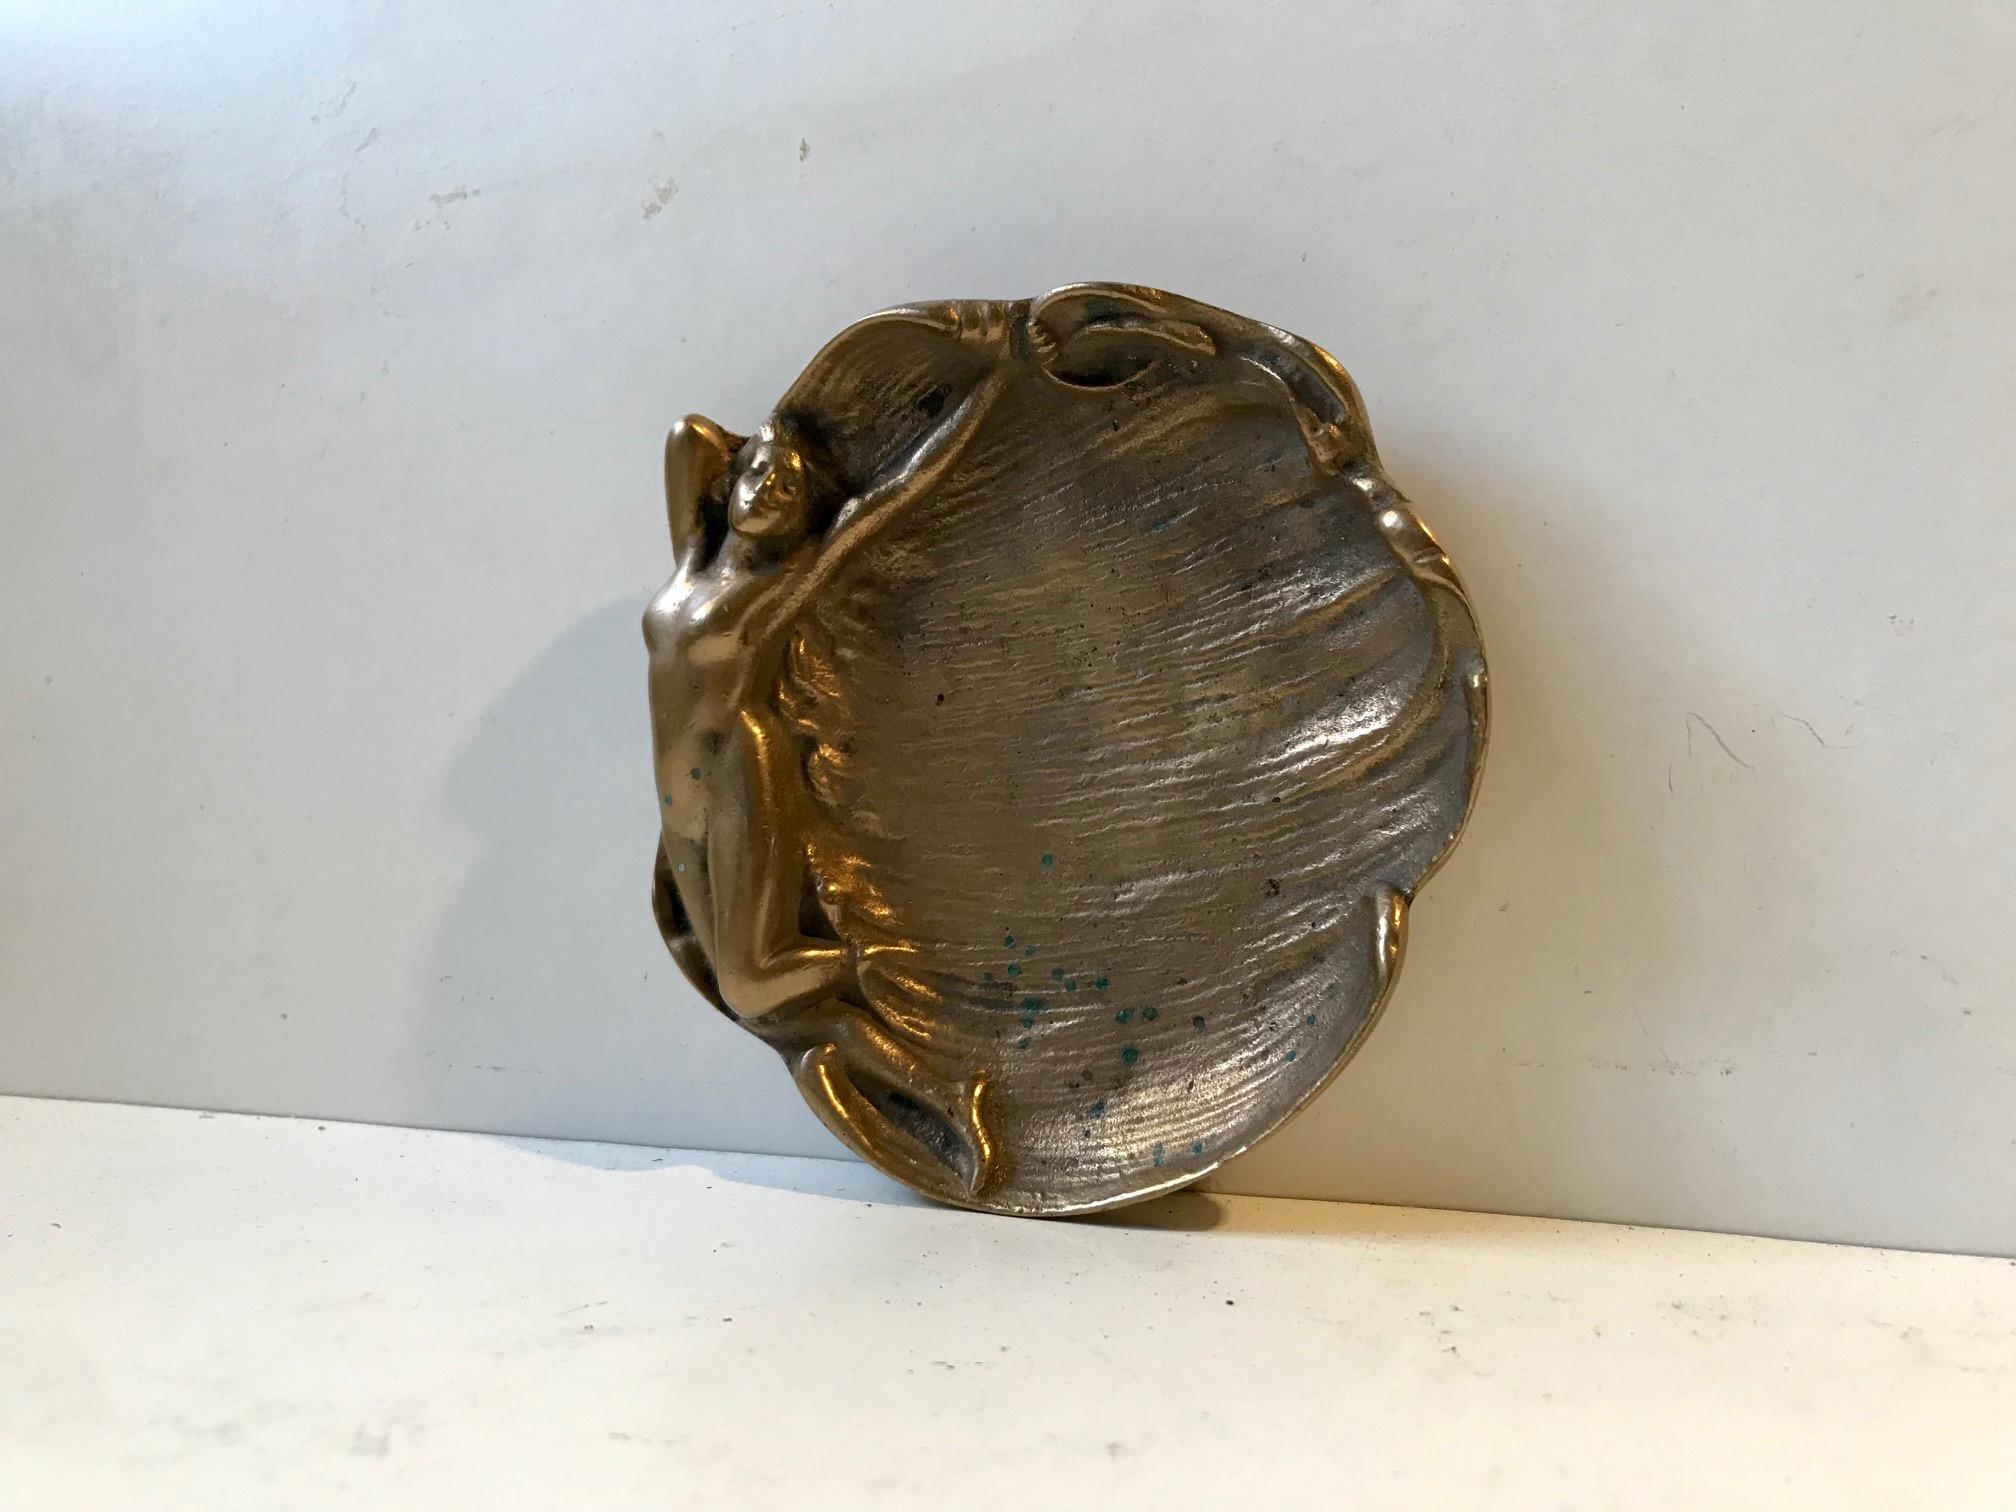 A French dish or ashtray fashioned out of brass. Delicate detailing and enlongated curves, manufactured in France during the 1920s in a style that bordlines between Art Nouveau and Art Deco.